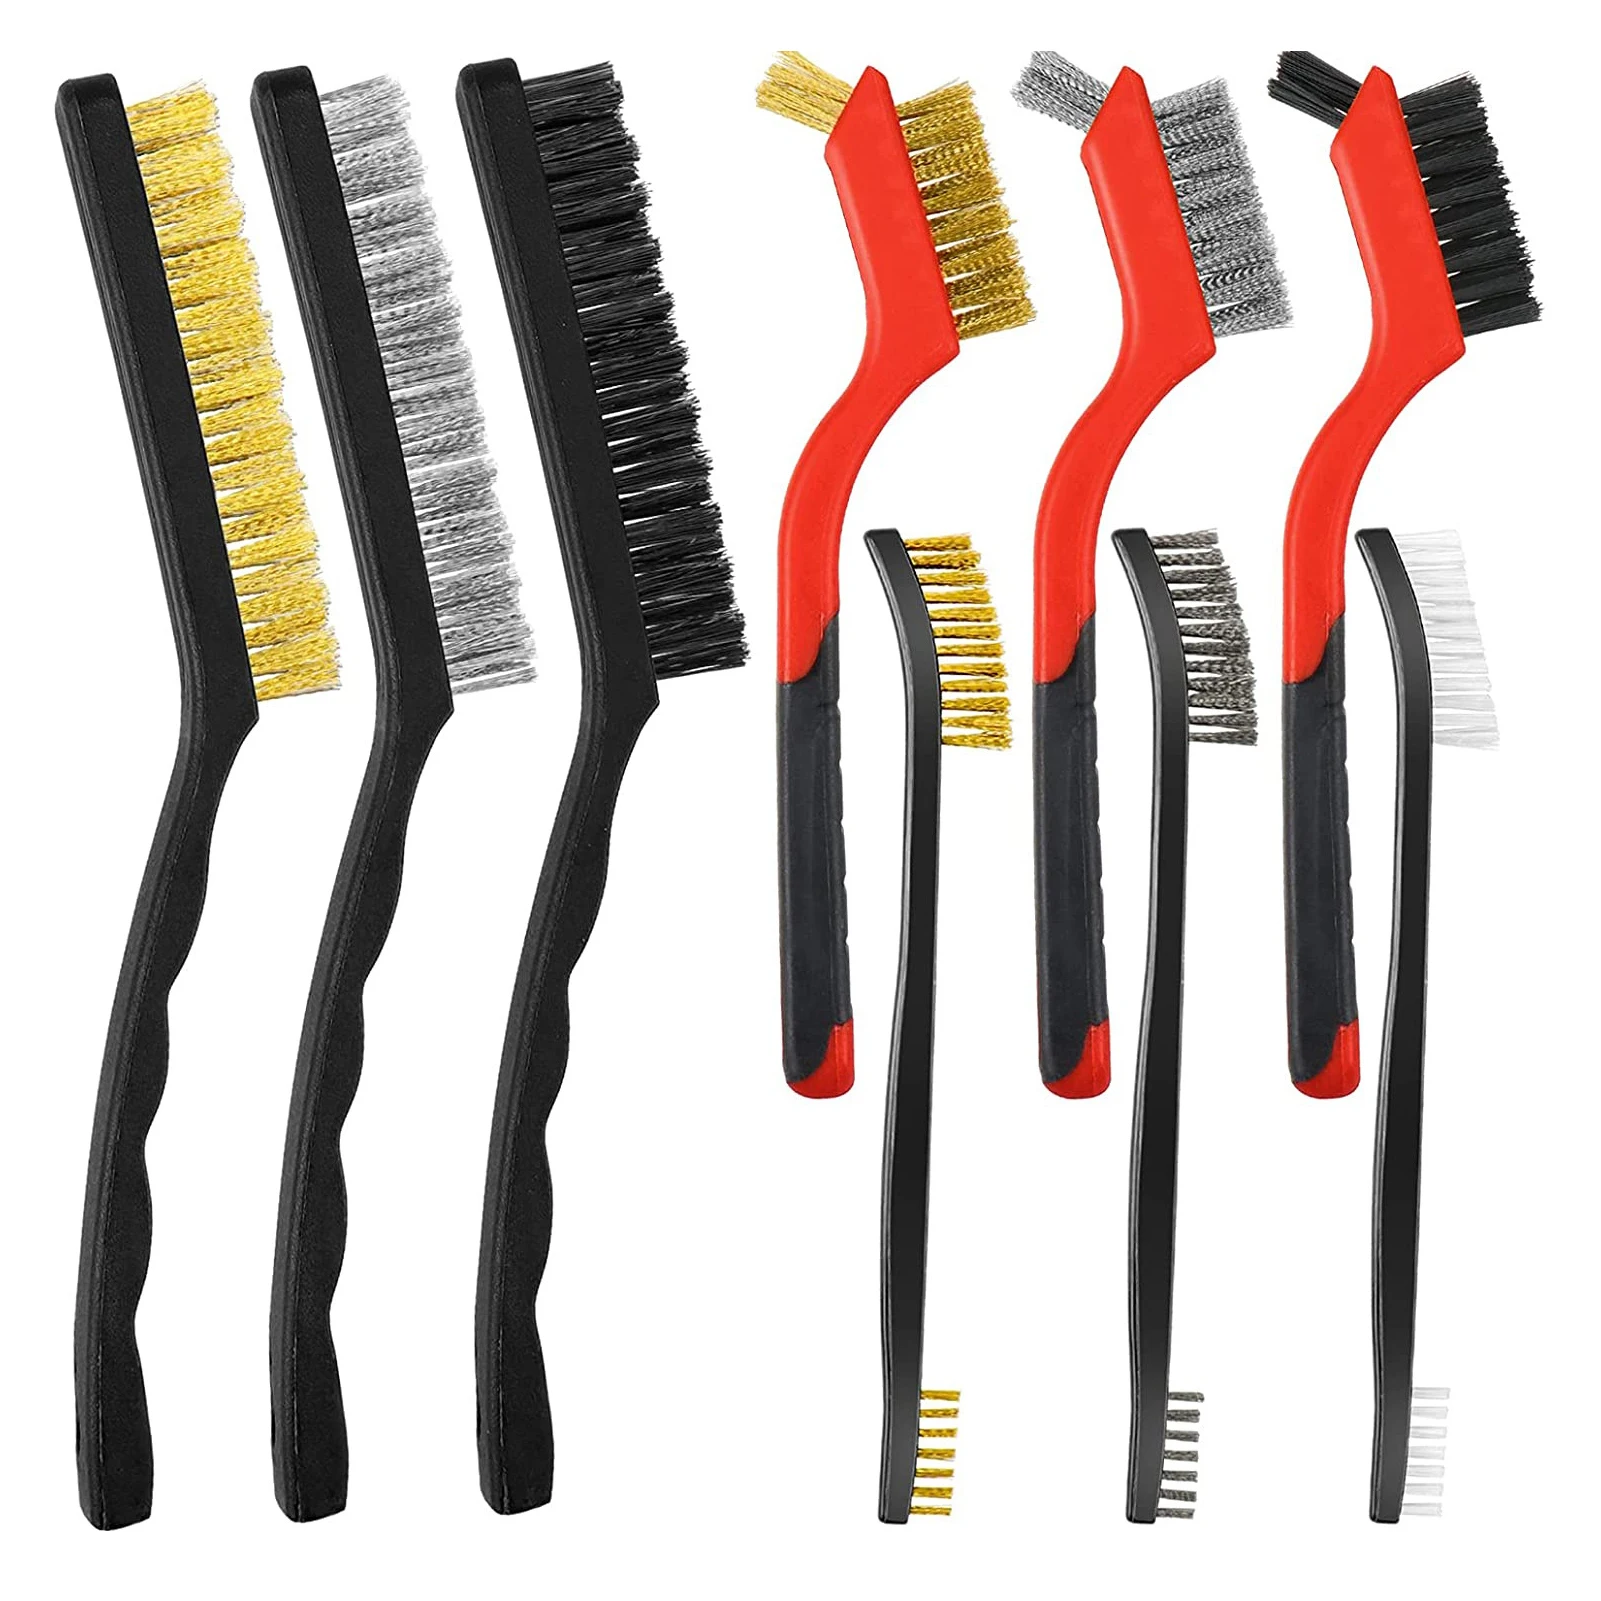 

9pcs Nylon Cleaning Heavy Duty Scrubbing Double Ended Practical Dust Remover Stainless Steel Rust Removal Wire Brush Flexible